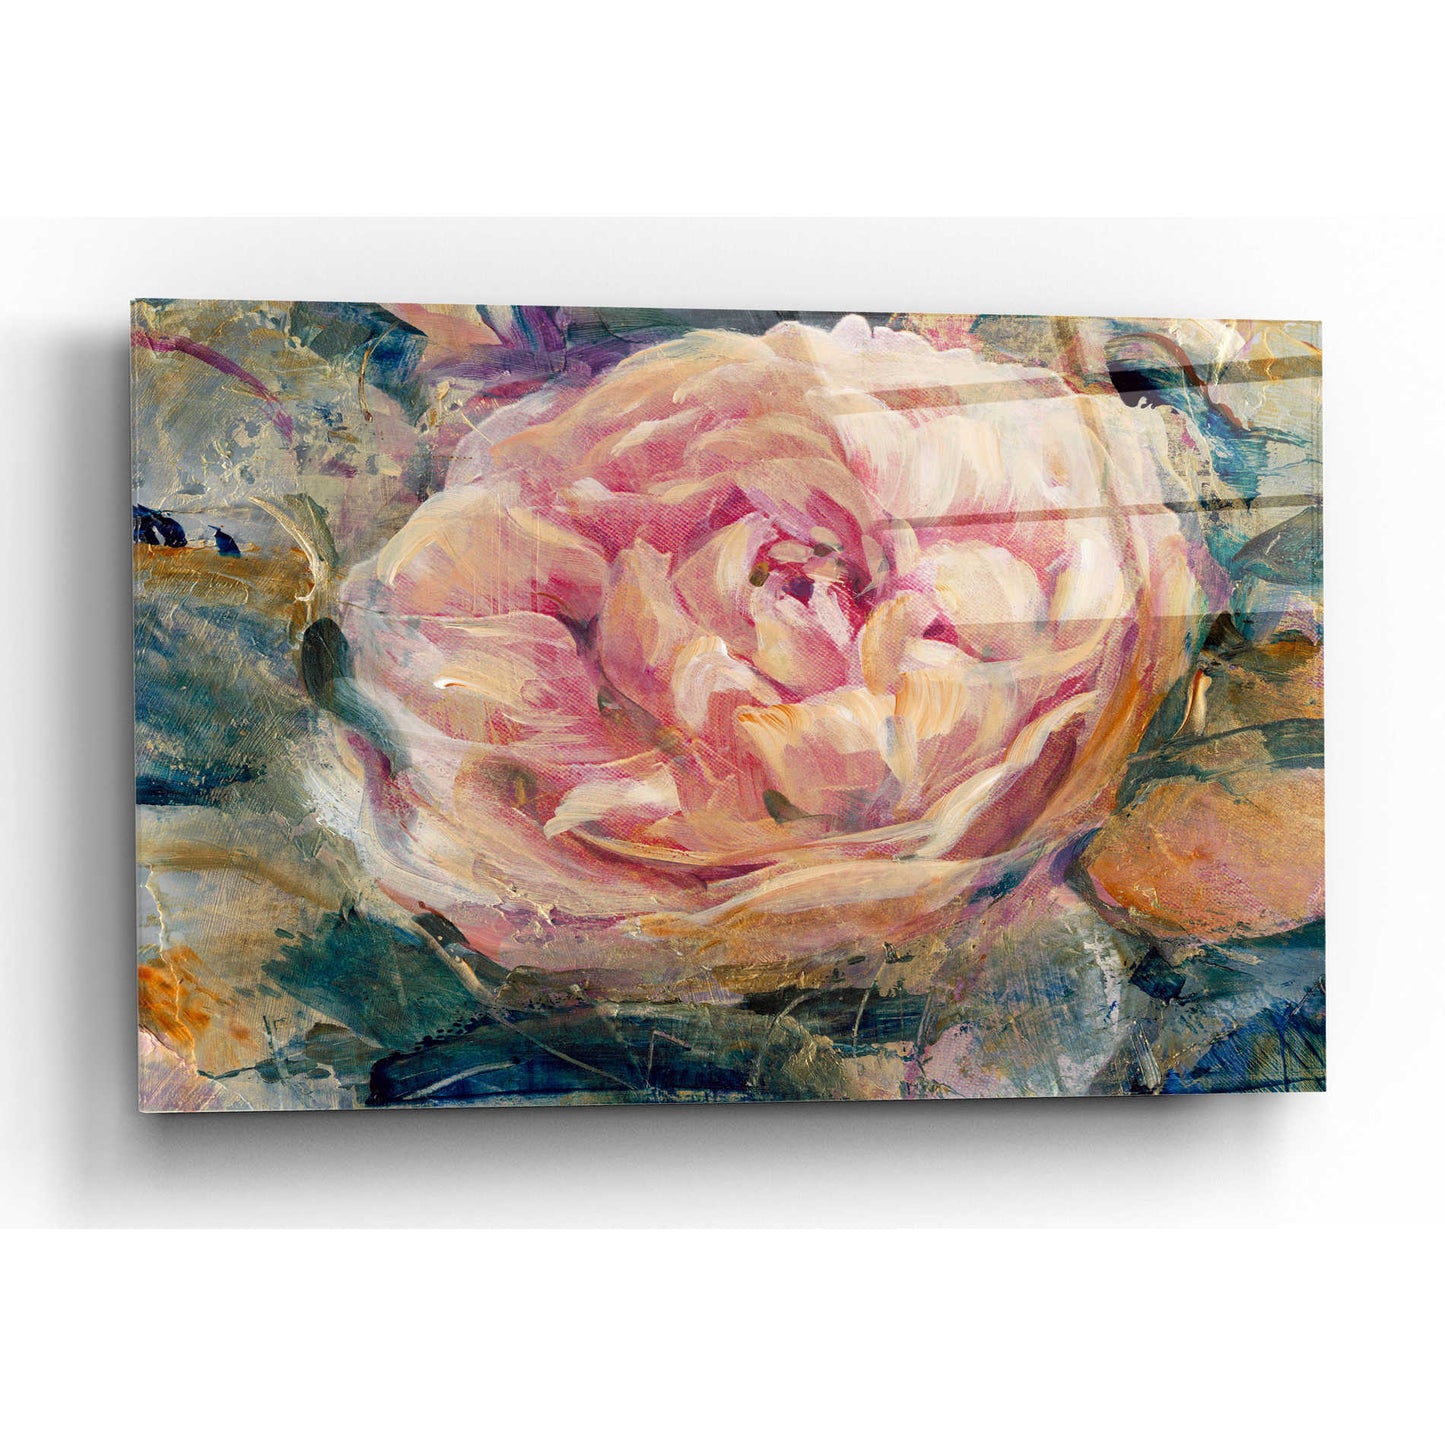 Epic Art 'Floral in Bloom IV' by Tim O'Toole, Acrylic Glass Wall Art